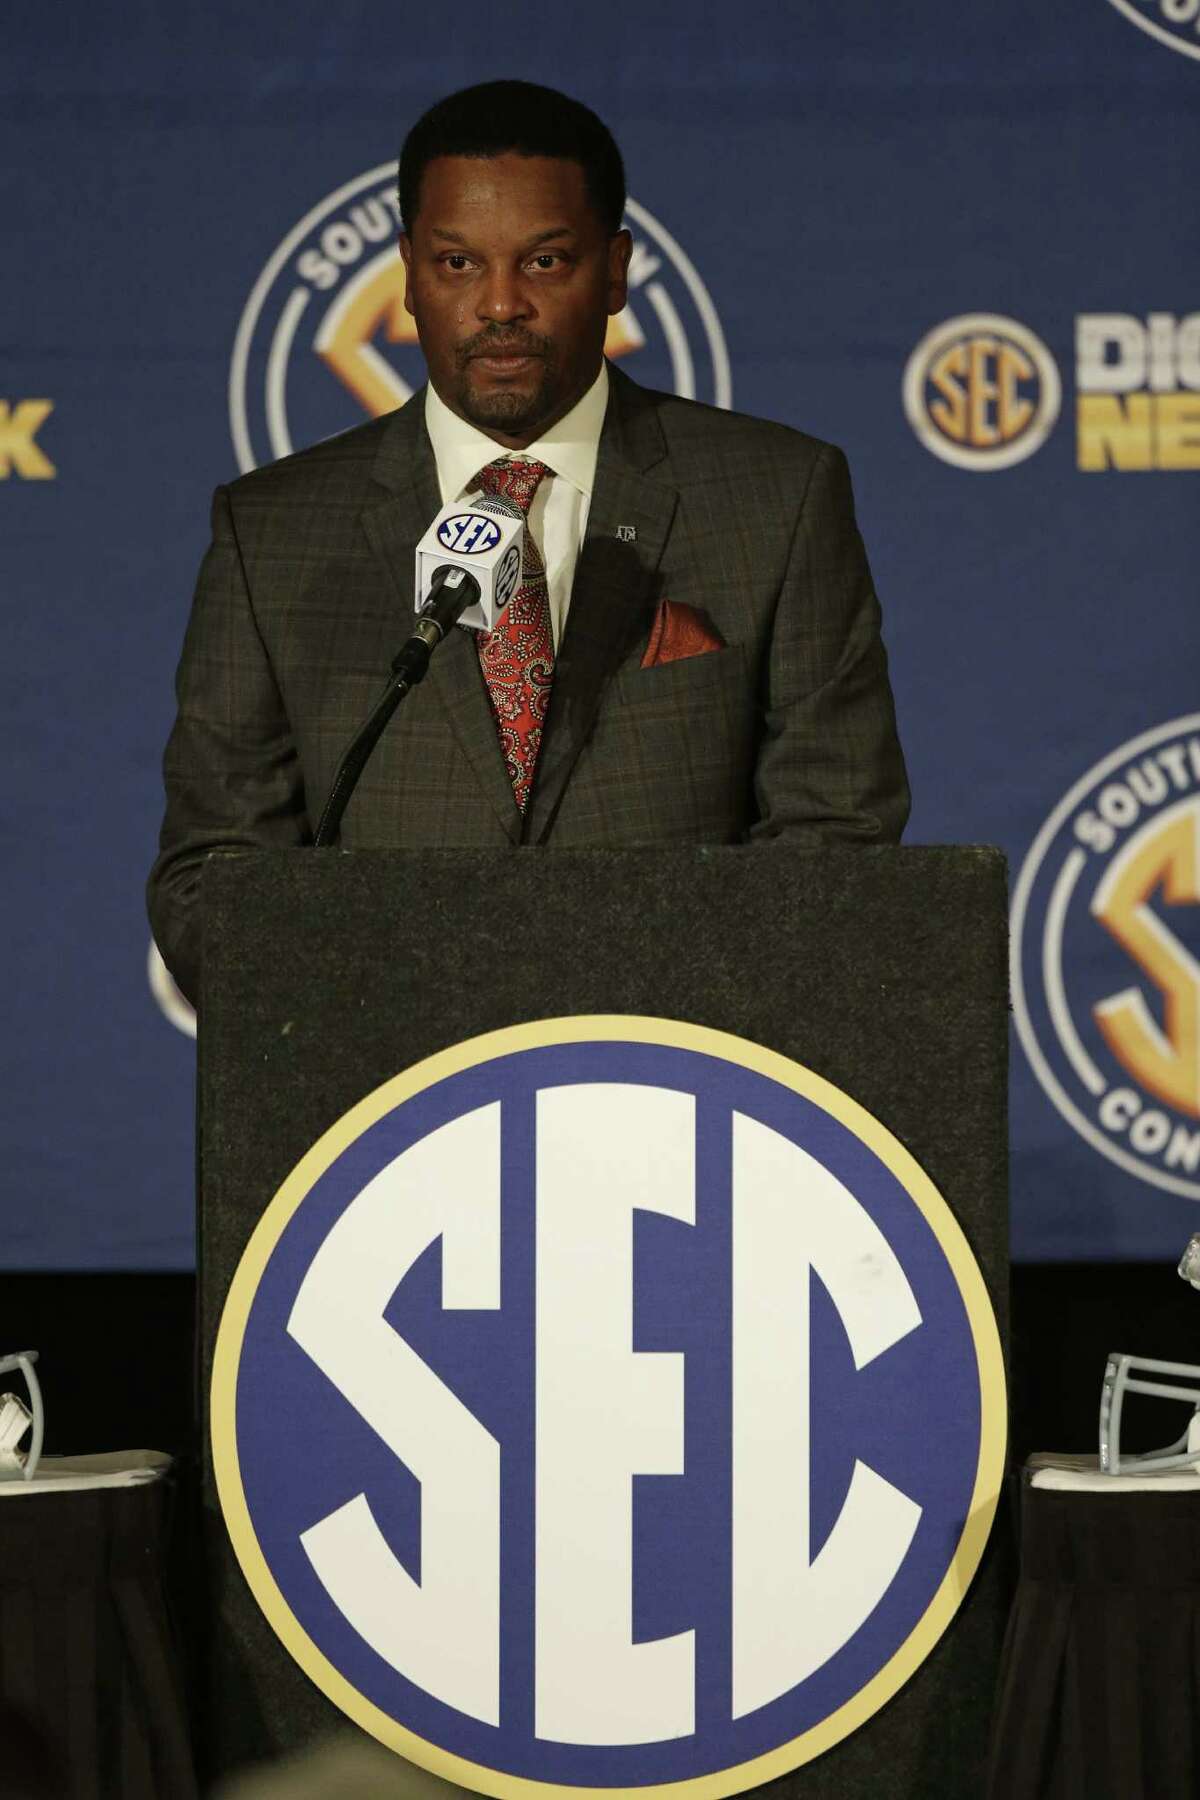 Texas A&M coach Kevin Sumlin said he felt a different vibe surrounding his Aggies at this year's SEC media days.